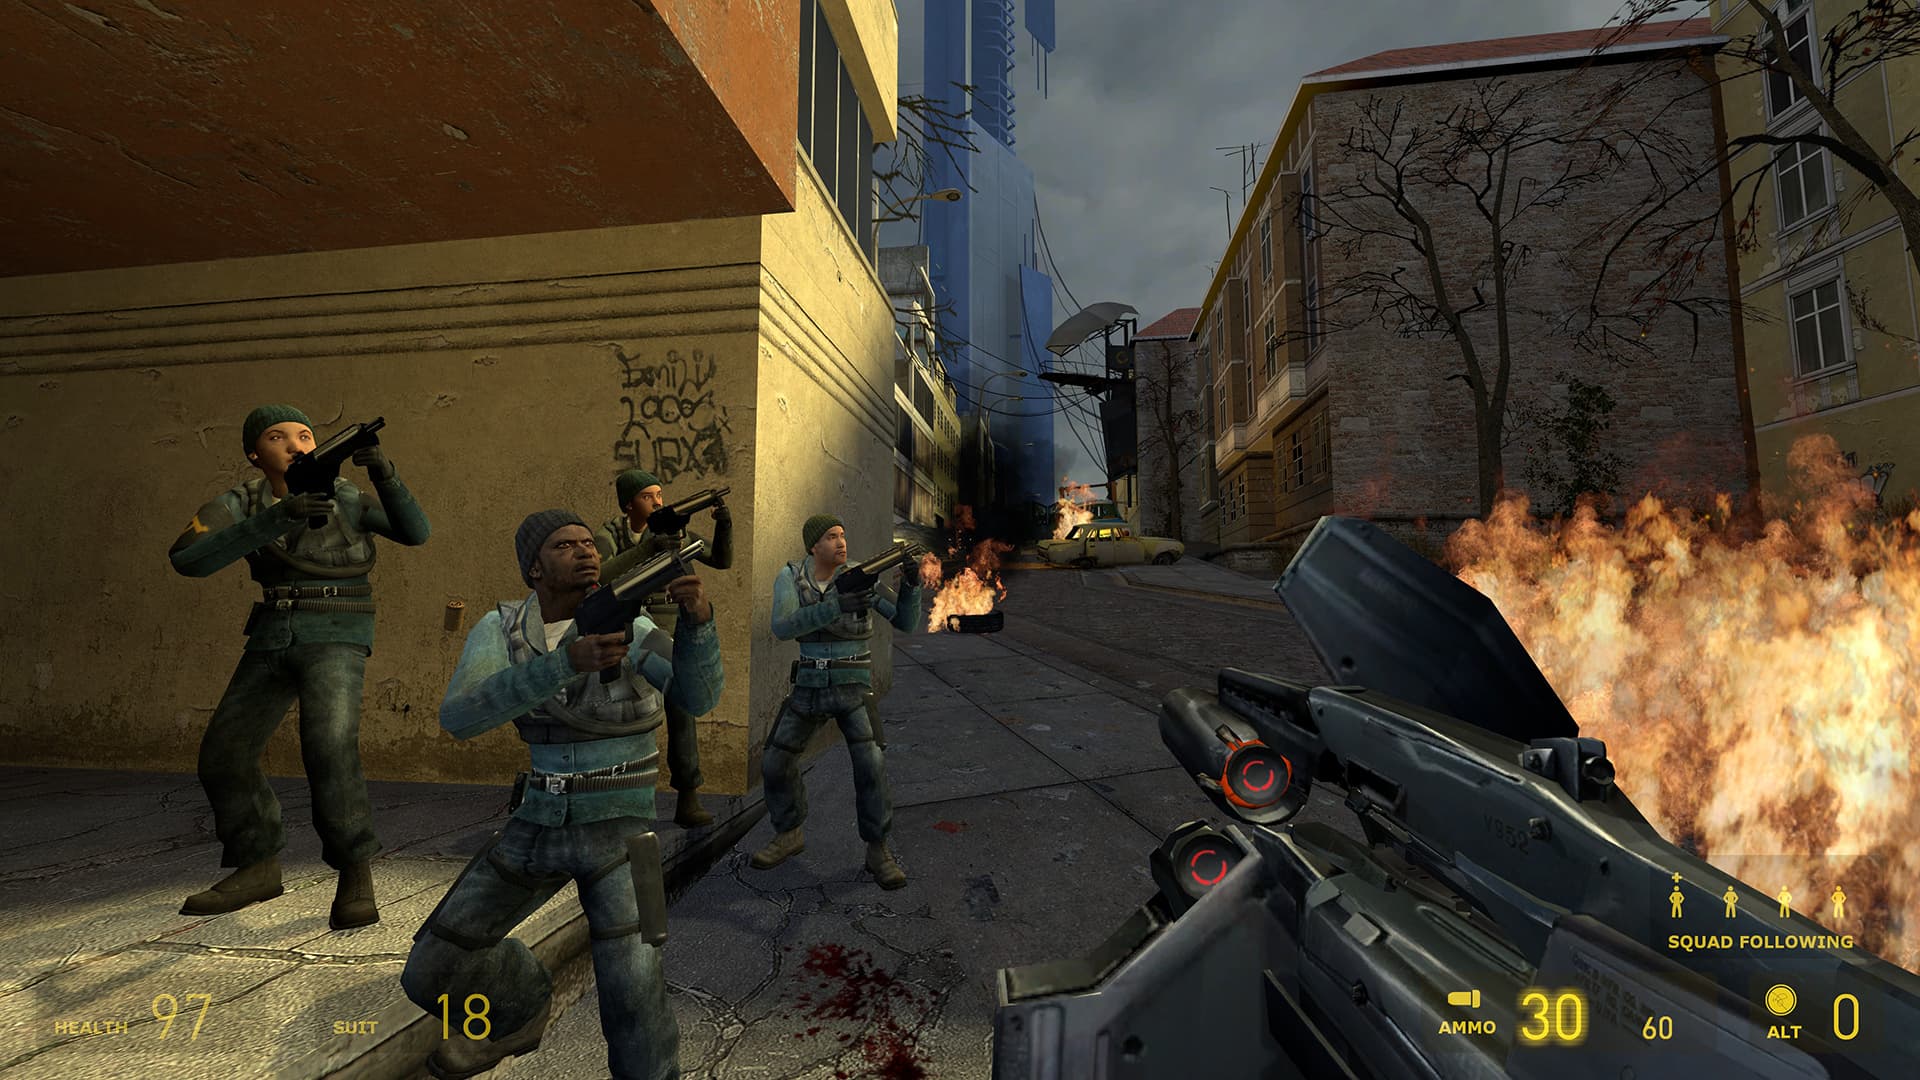 A screenshot from Half-Life 2. A squad of rebels aims at the skies as Gordon Freeman watches amidst burning wreckage in the war-torn streets of City 17.